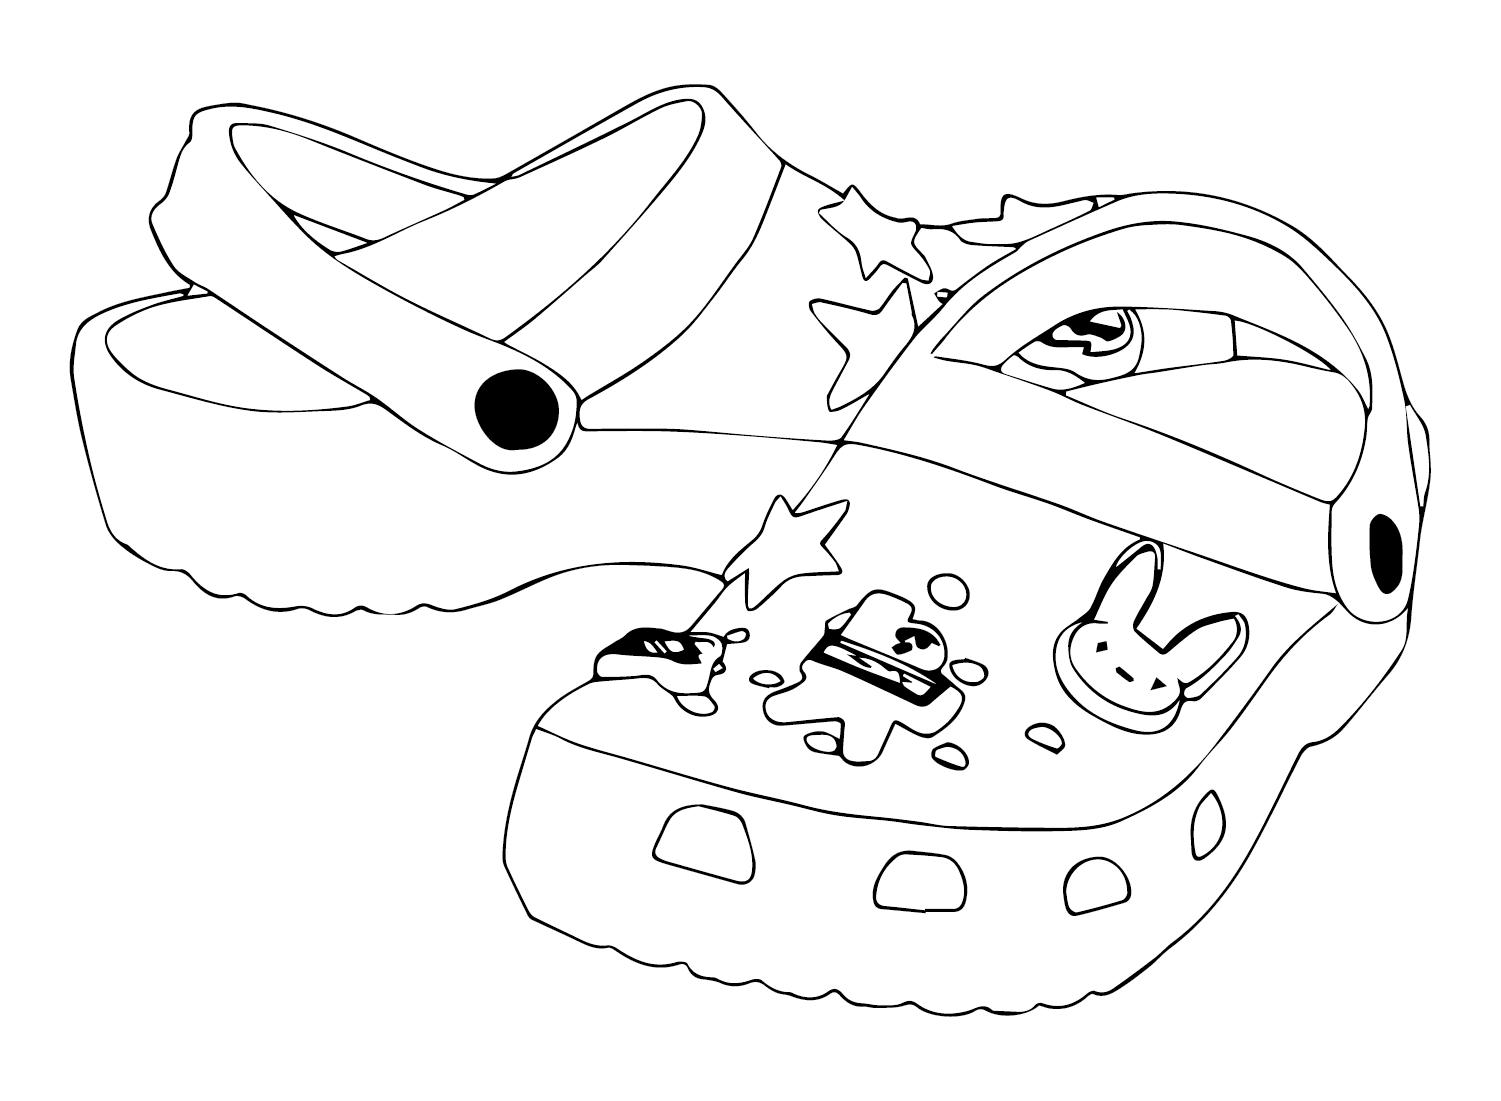 Crocs Coloring Pages - Coloring Pages For Kids And Adults